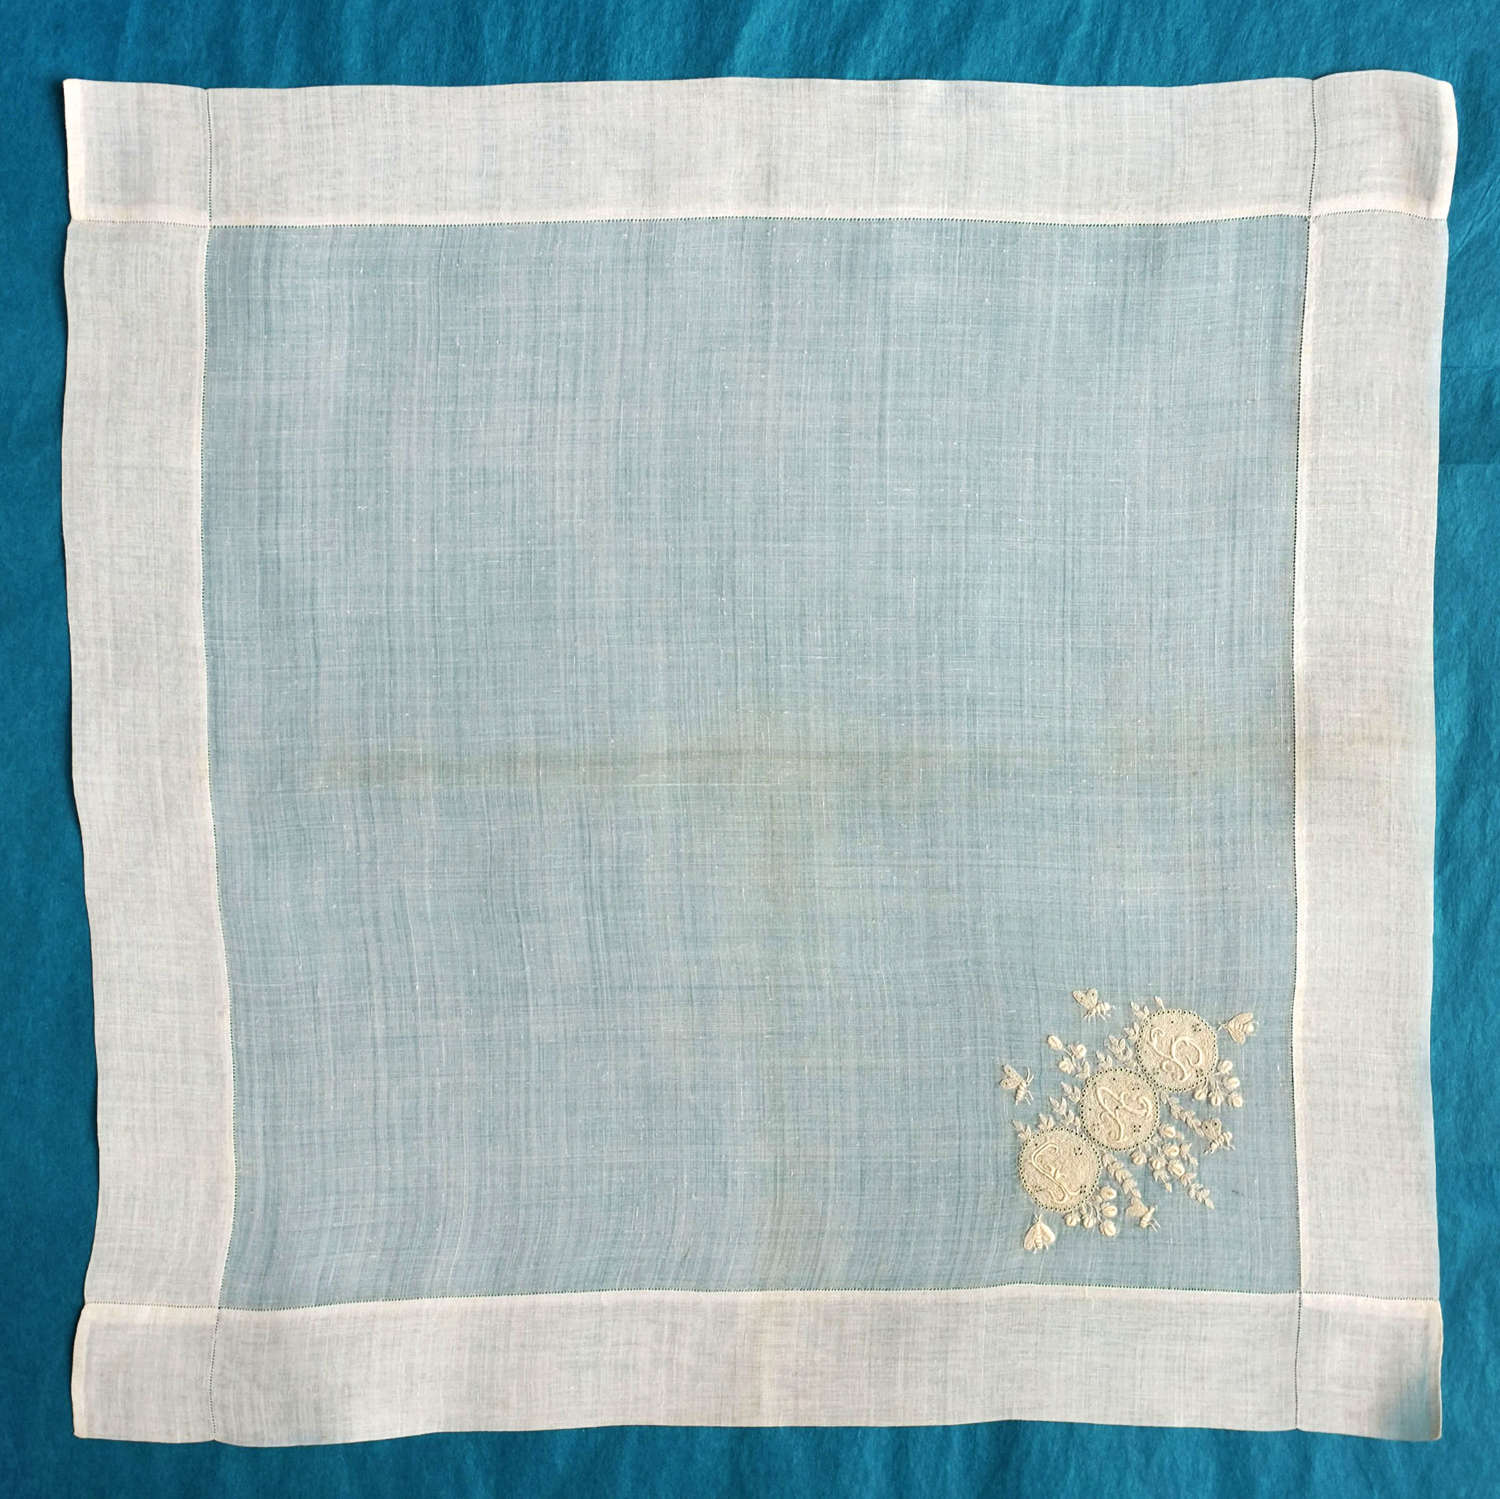 19th Century Handkerchief with Monogram in Art Nouveau Style with Bees